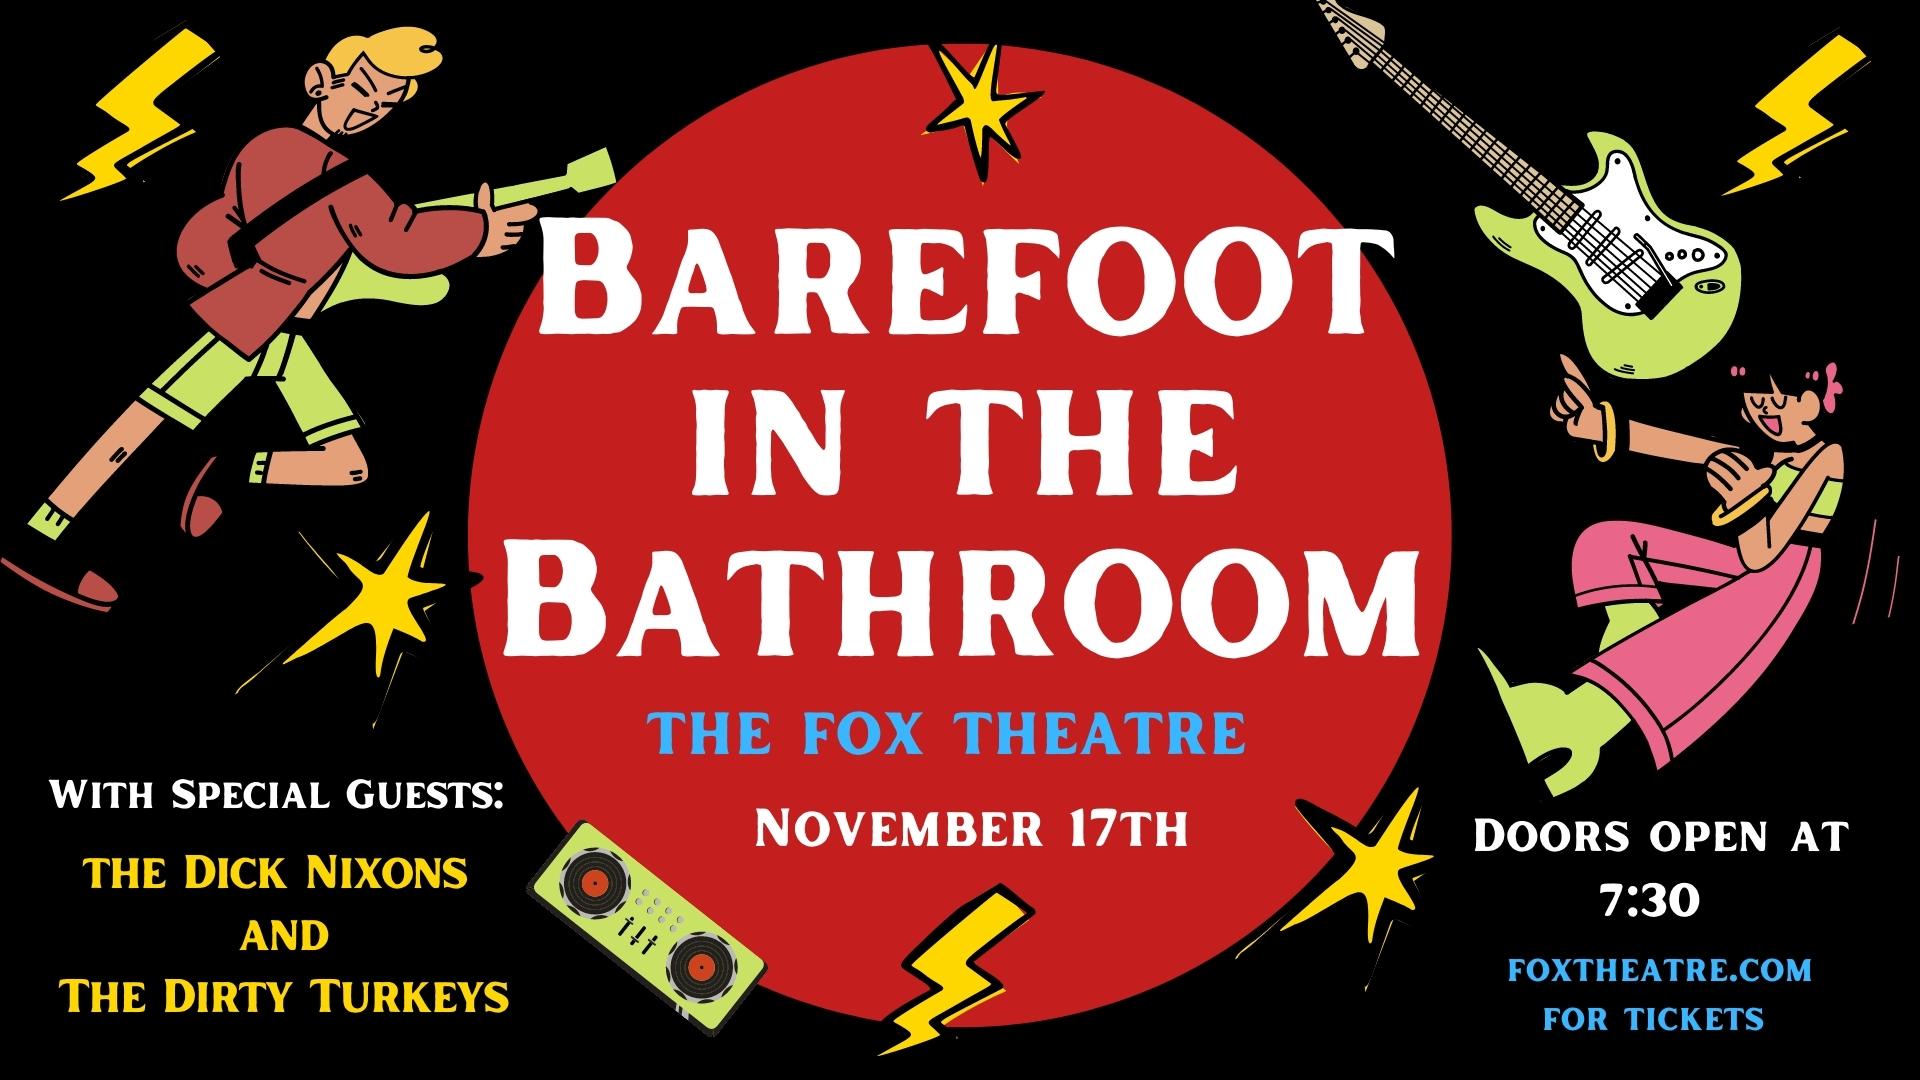 Barefoot in the Bathroom with The Dick Nixons, The Dirty Turkeys